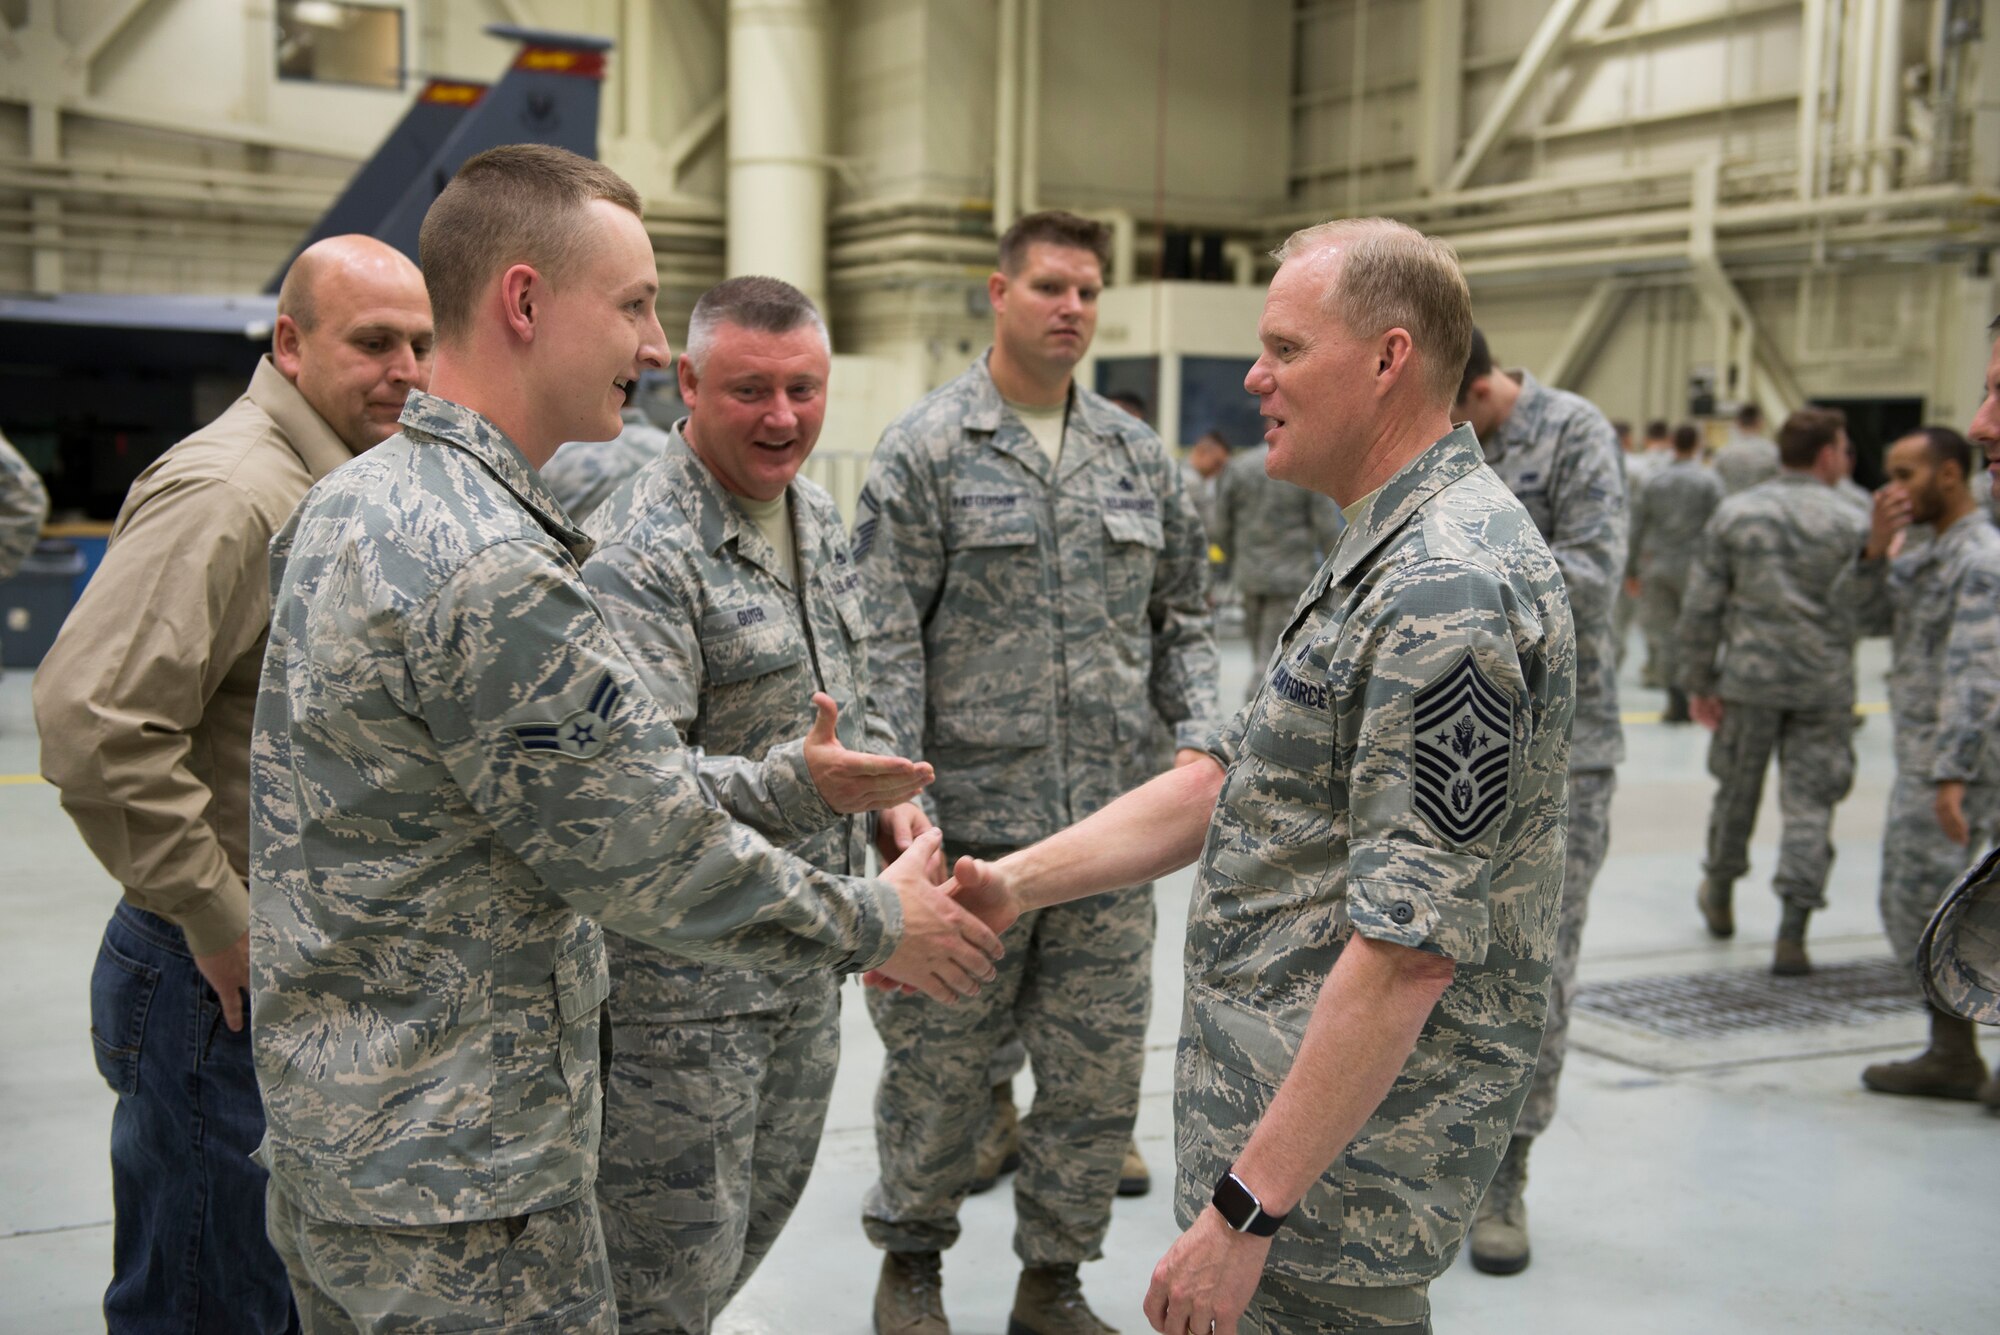 Chief Master Sgt. of the Air Force James Cody meets with airmen during a Q&A with the 366th Maintenance Squadron during a night shift May 4, 2016, at Mountain Home Air Force Base, Idaho. The Q&A gave maintainers on night shift, who would not be able to attend the following day’s all-call, the chance to interact with Cody. (U.S. Air Force photo by Airman 1st Class Chester Mientkiewicz/Released)